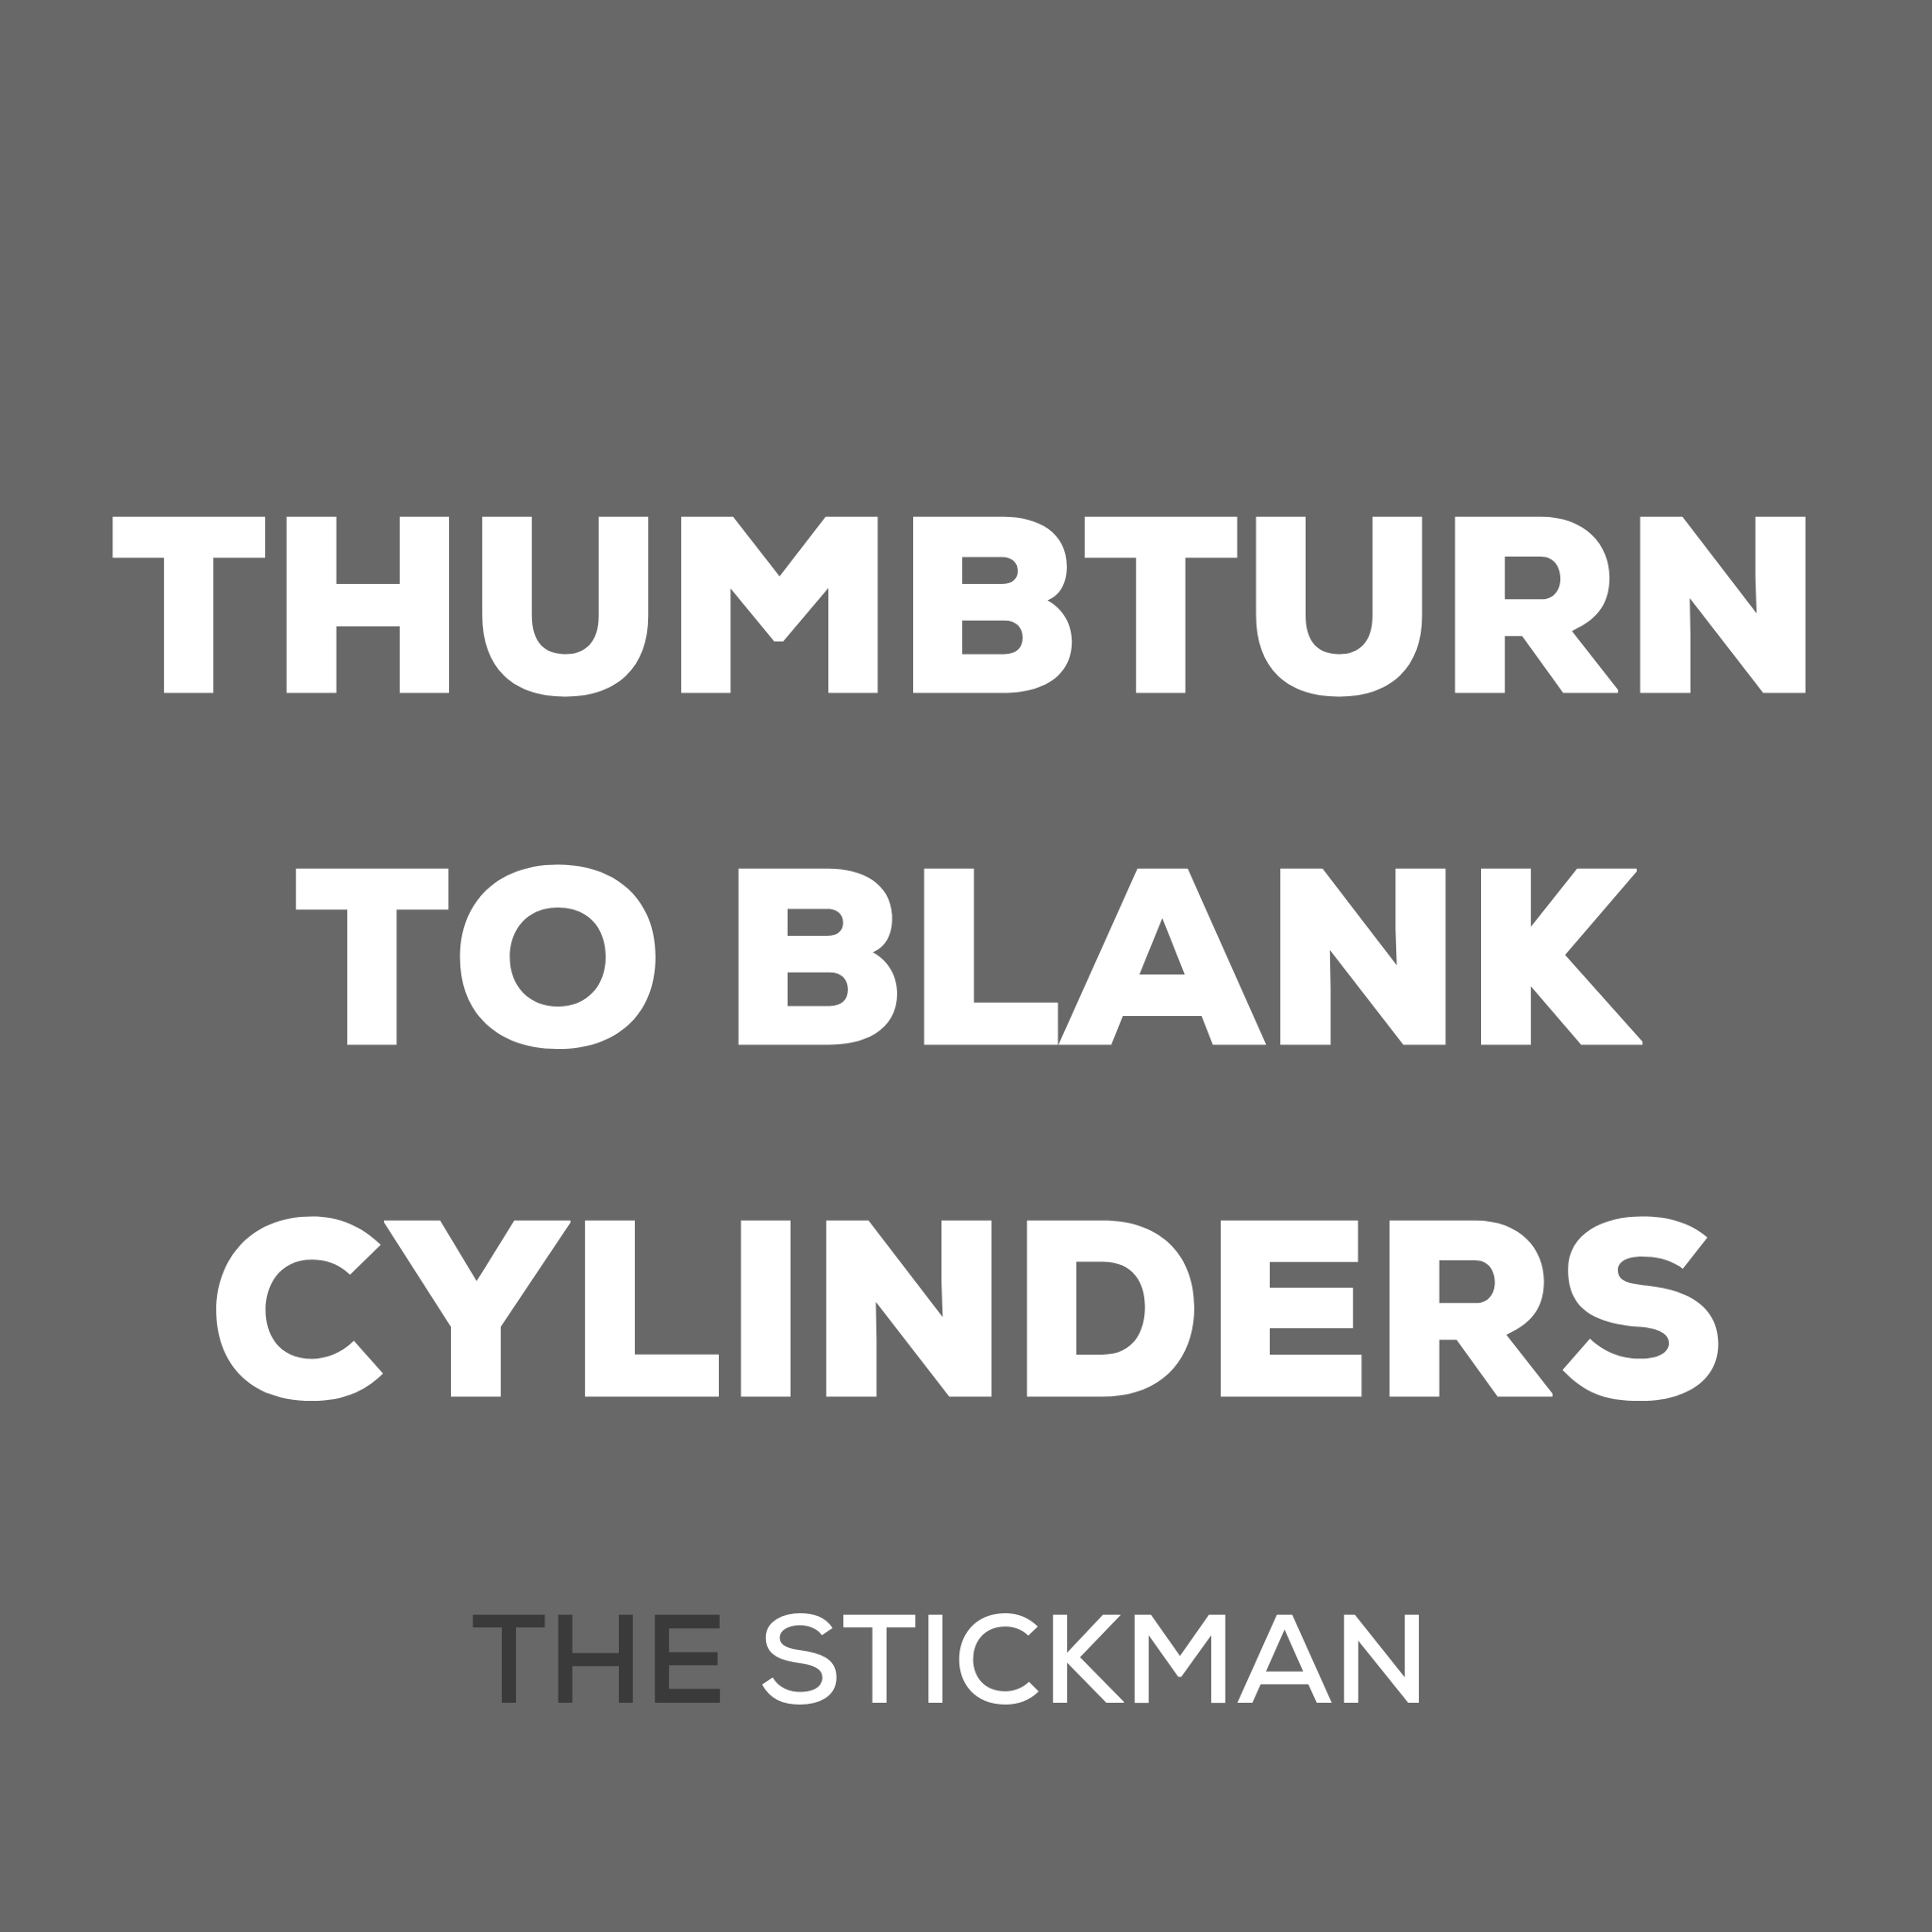 THUMBTURN TO BLANK CYLINDERS